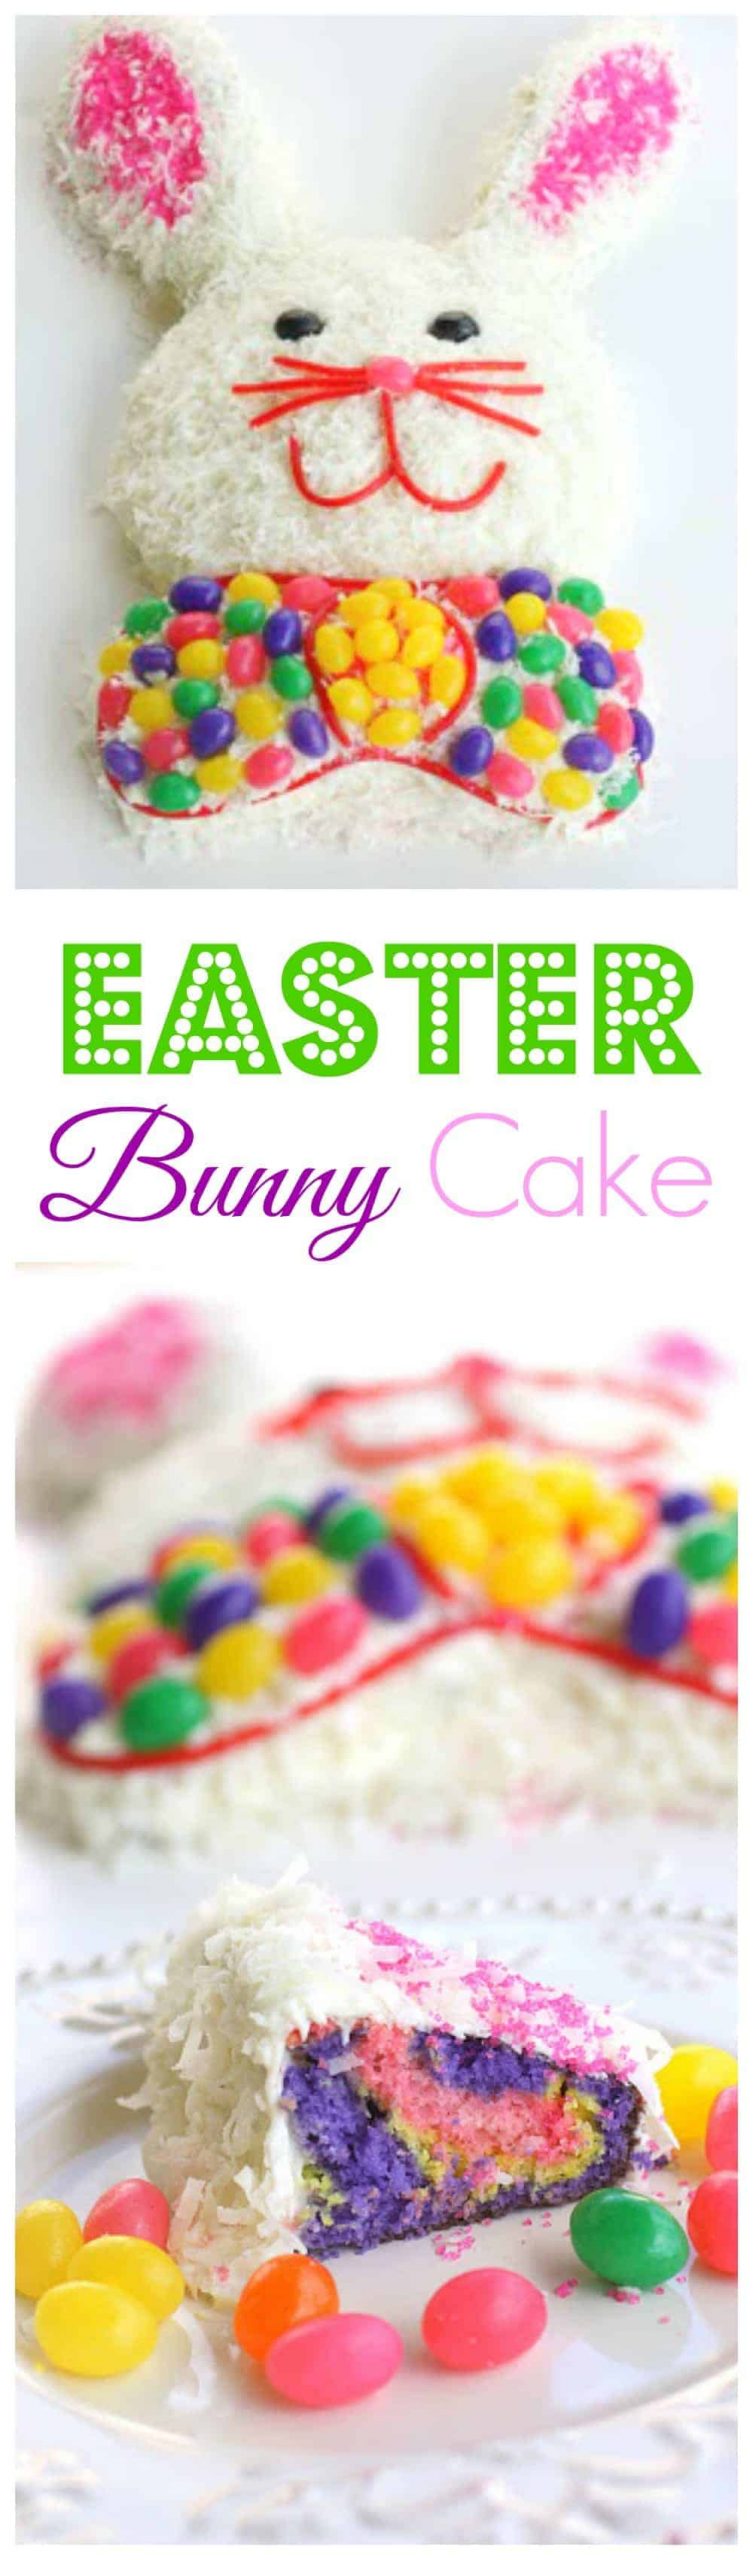 Easter Bunny Cake - so easy and always a hit with everyone for Easter. #easter #bunny #cake #recipe #dessert #easy